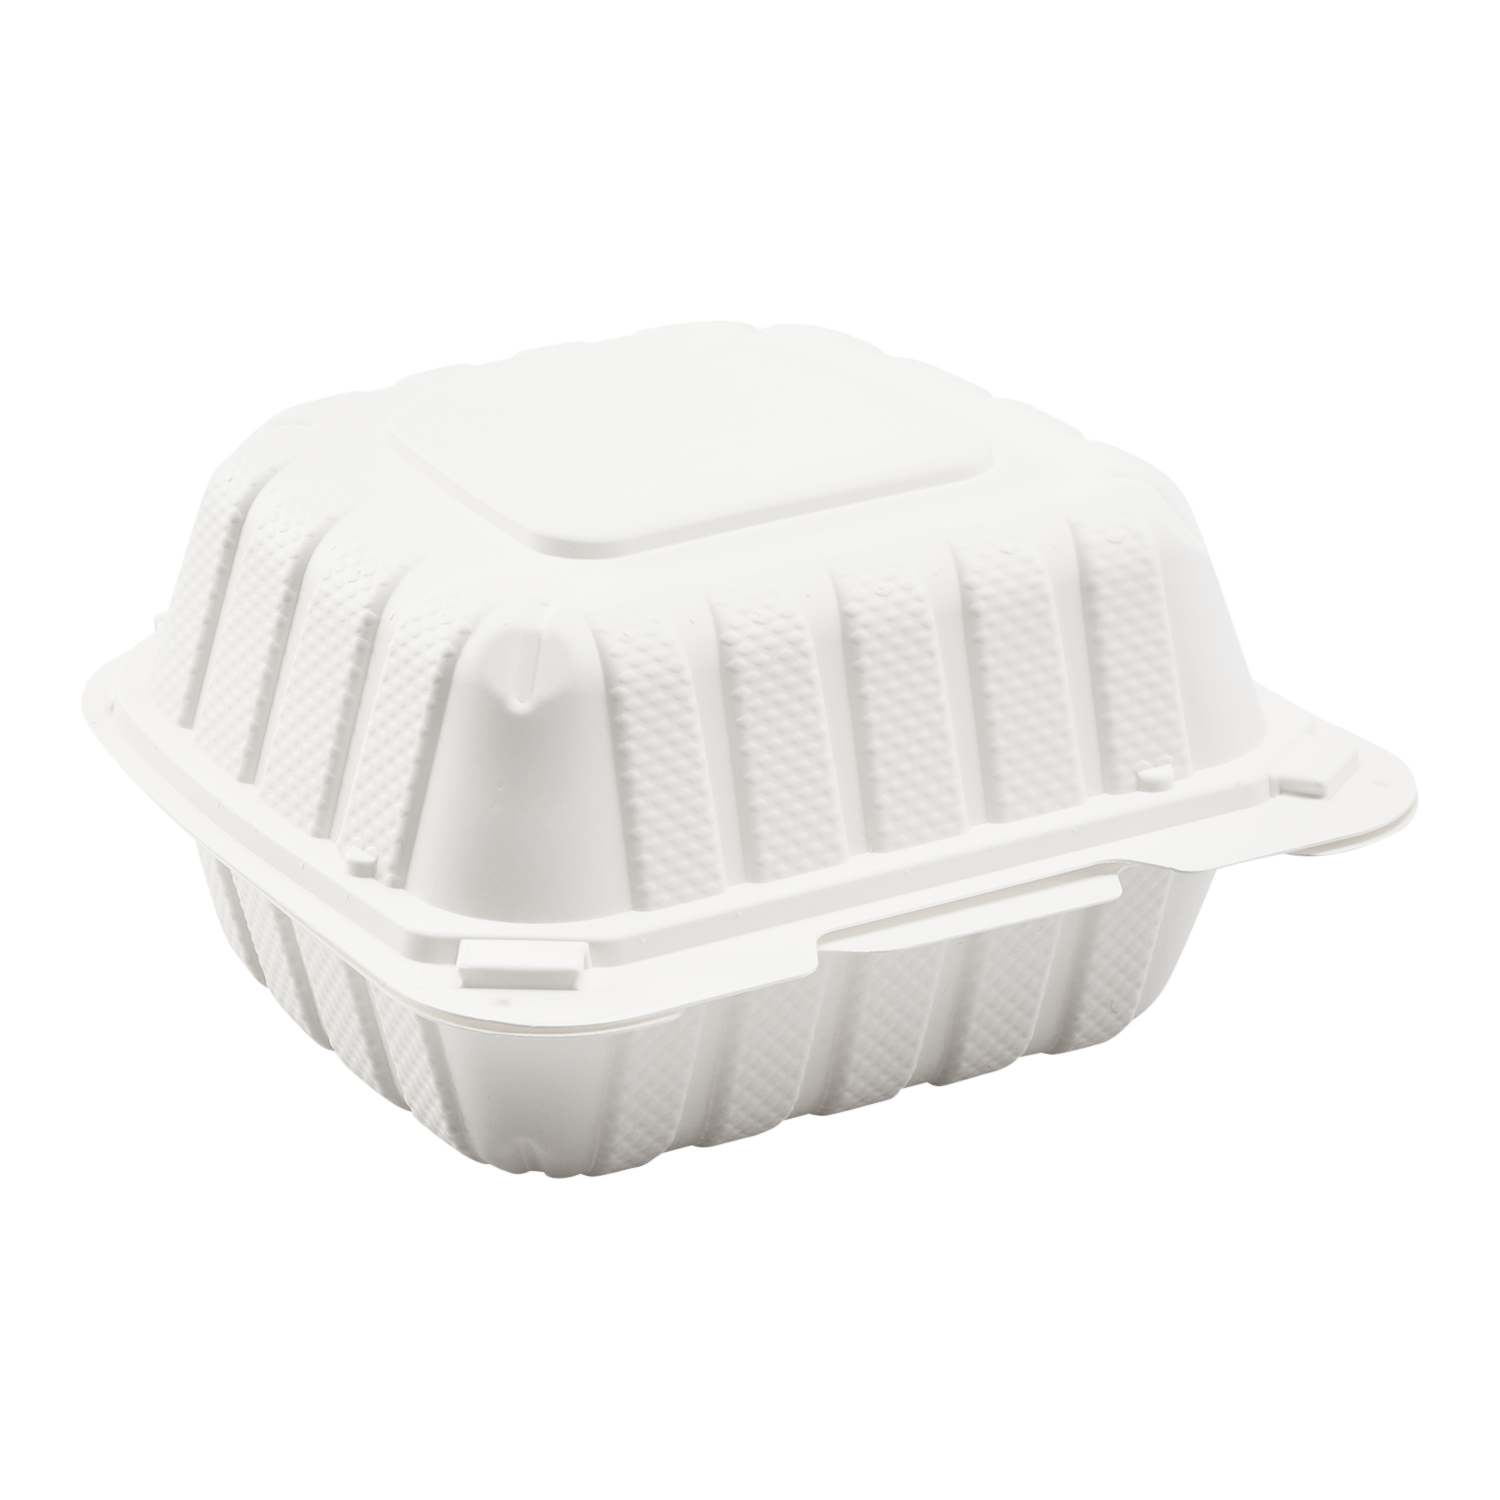 Small Food Storage Containers